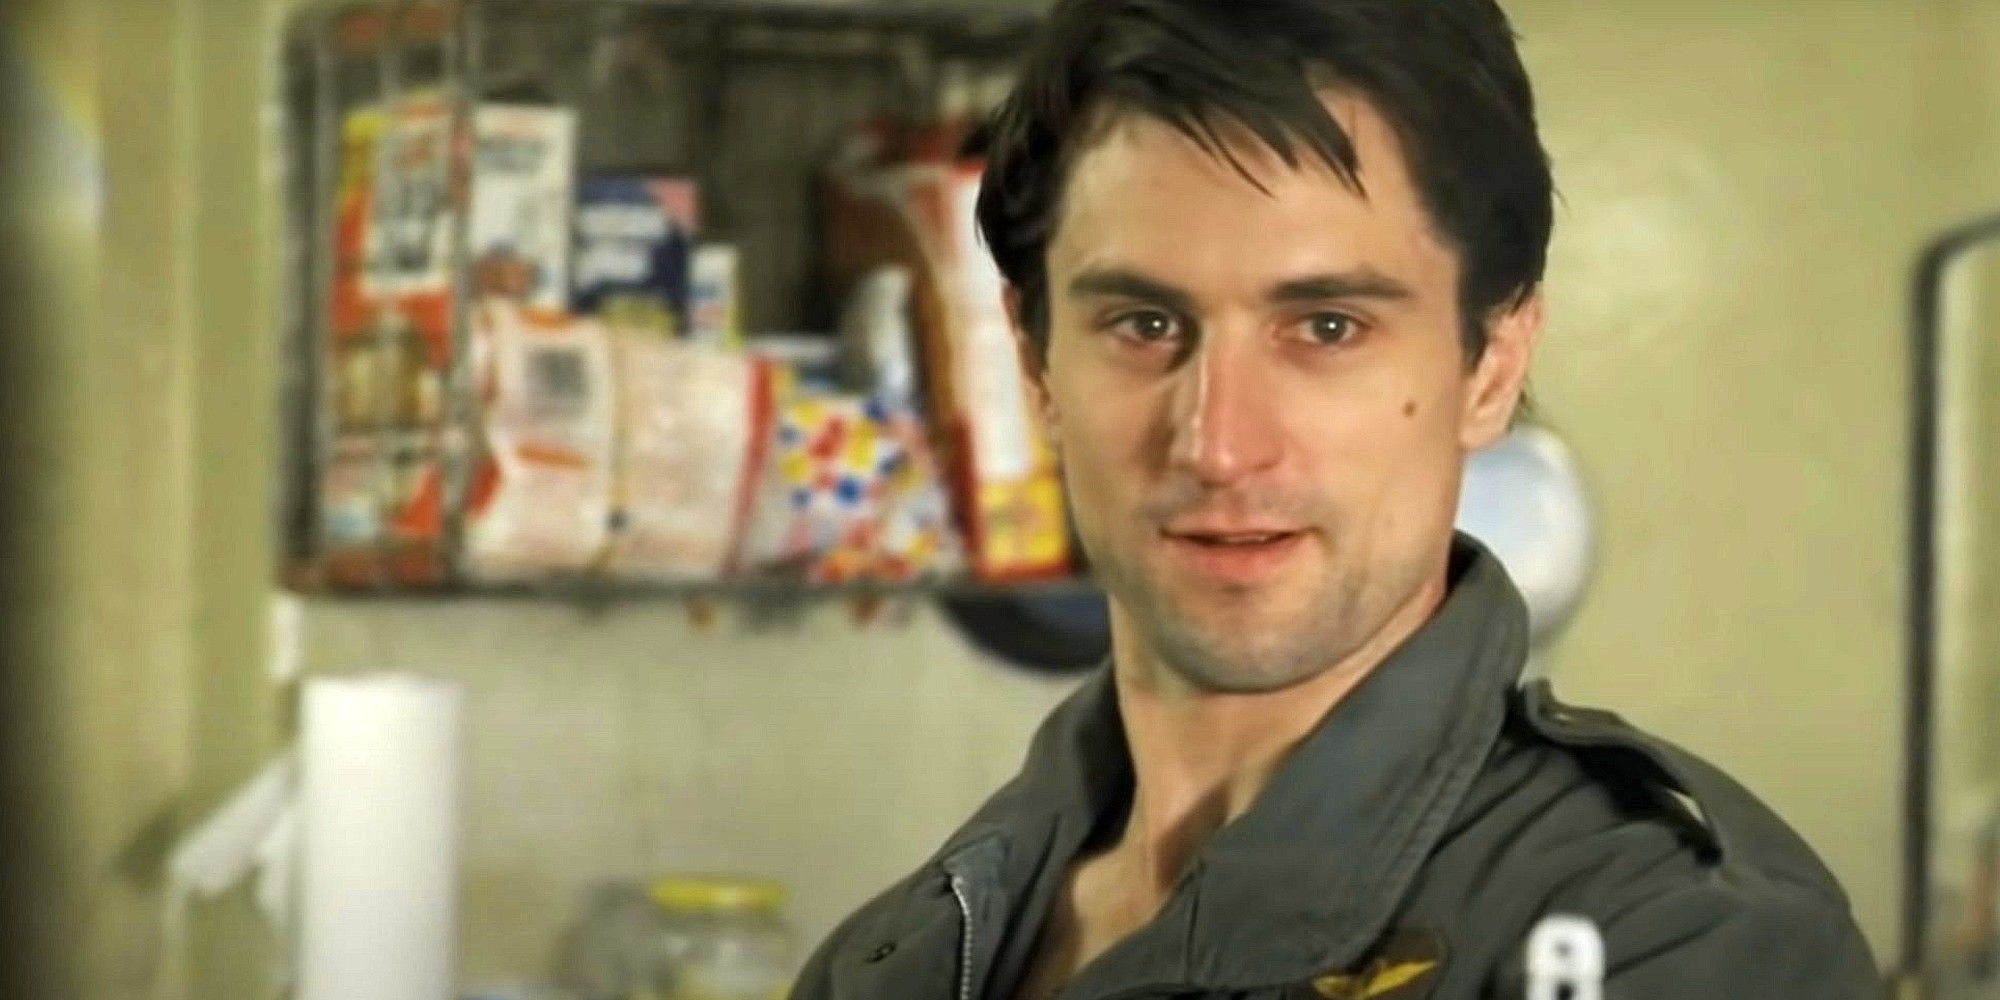 Robert De Niro as Travis Bickle looking intently at something in 'Taxi Driver'